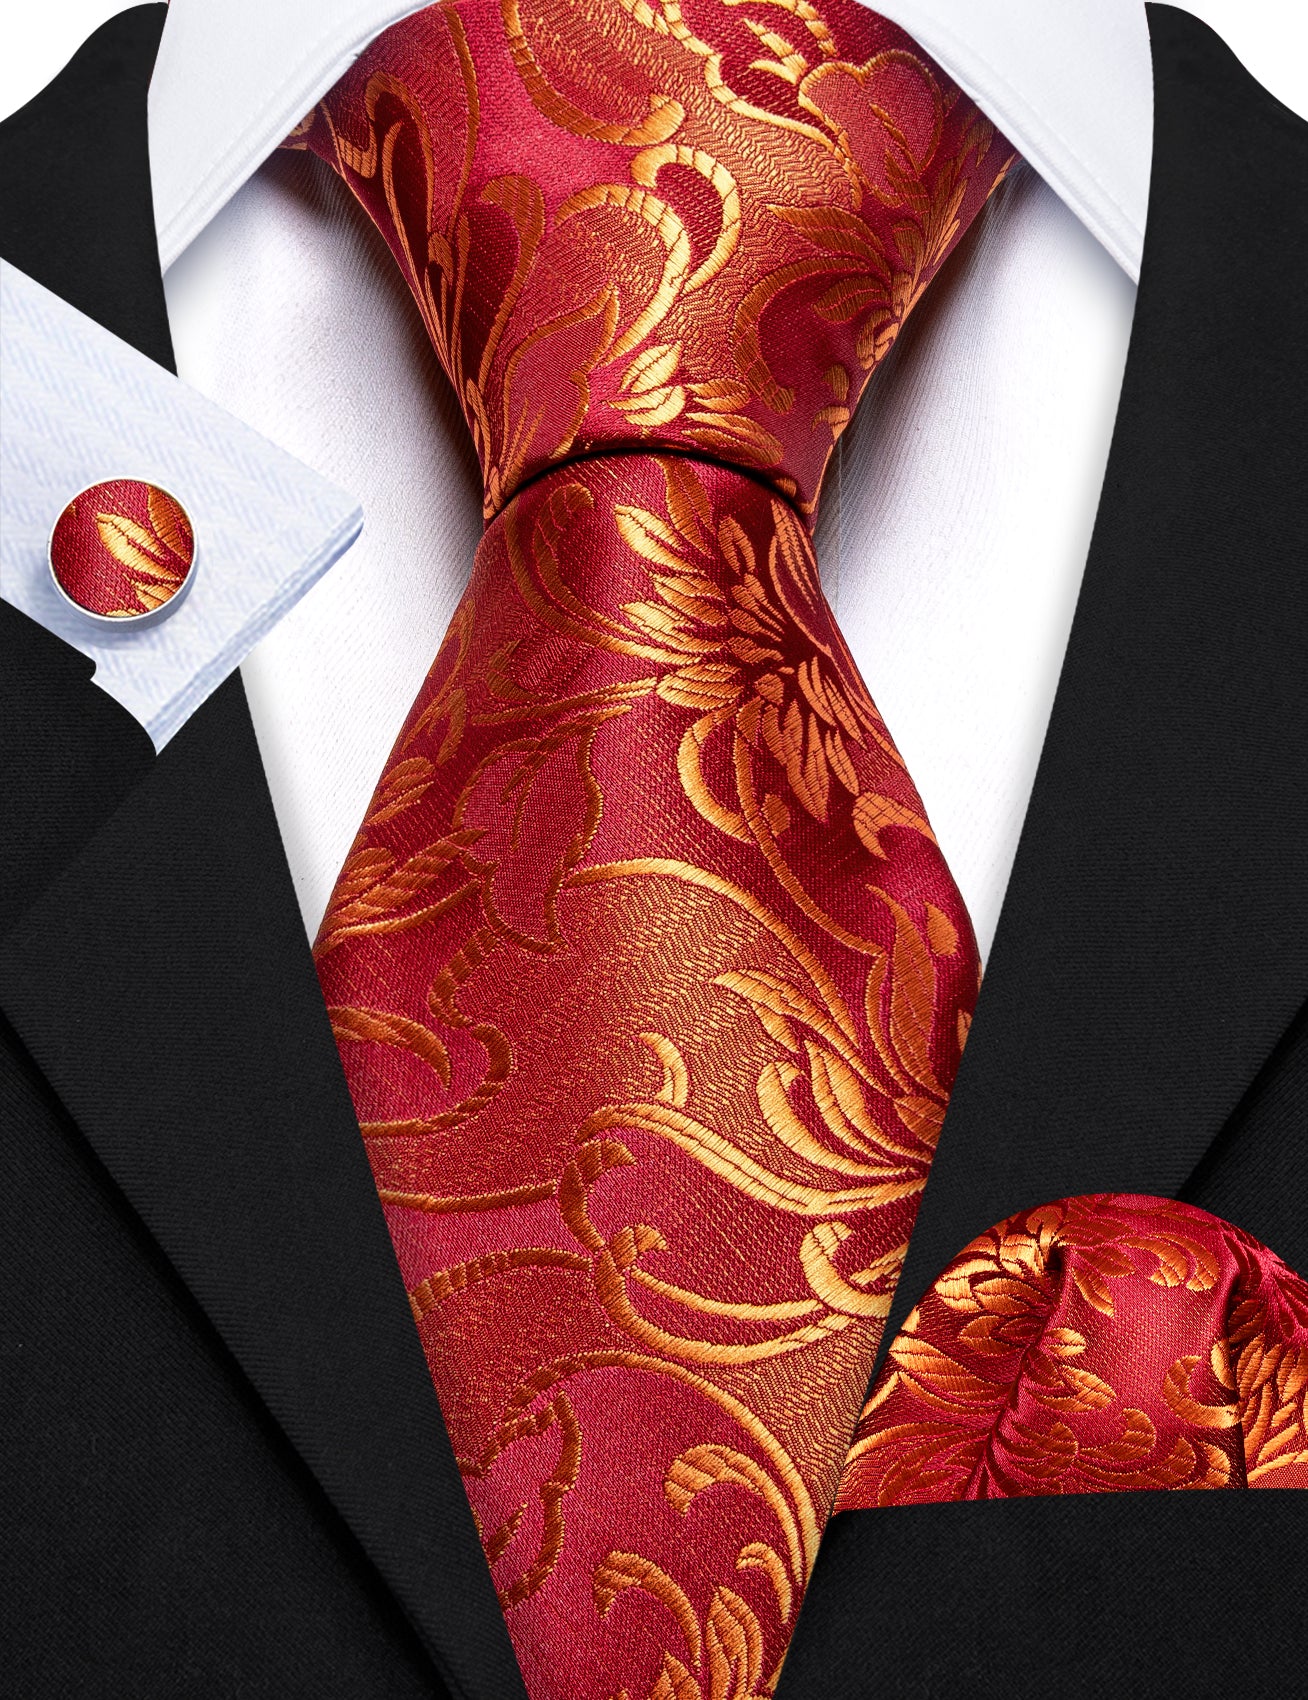 Barry.wang Floral Tie Red Gold Paisley Silk Tie Hanky Cufflinks Set